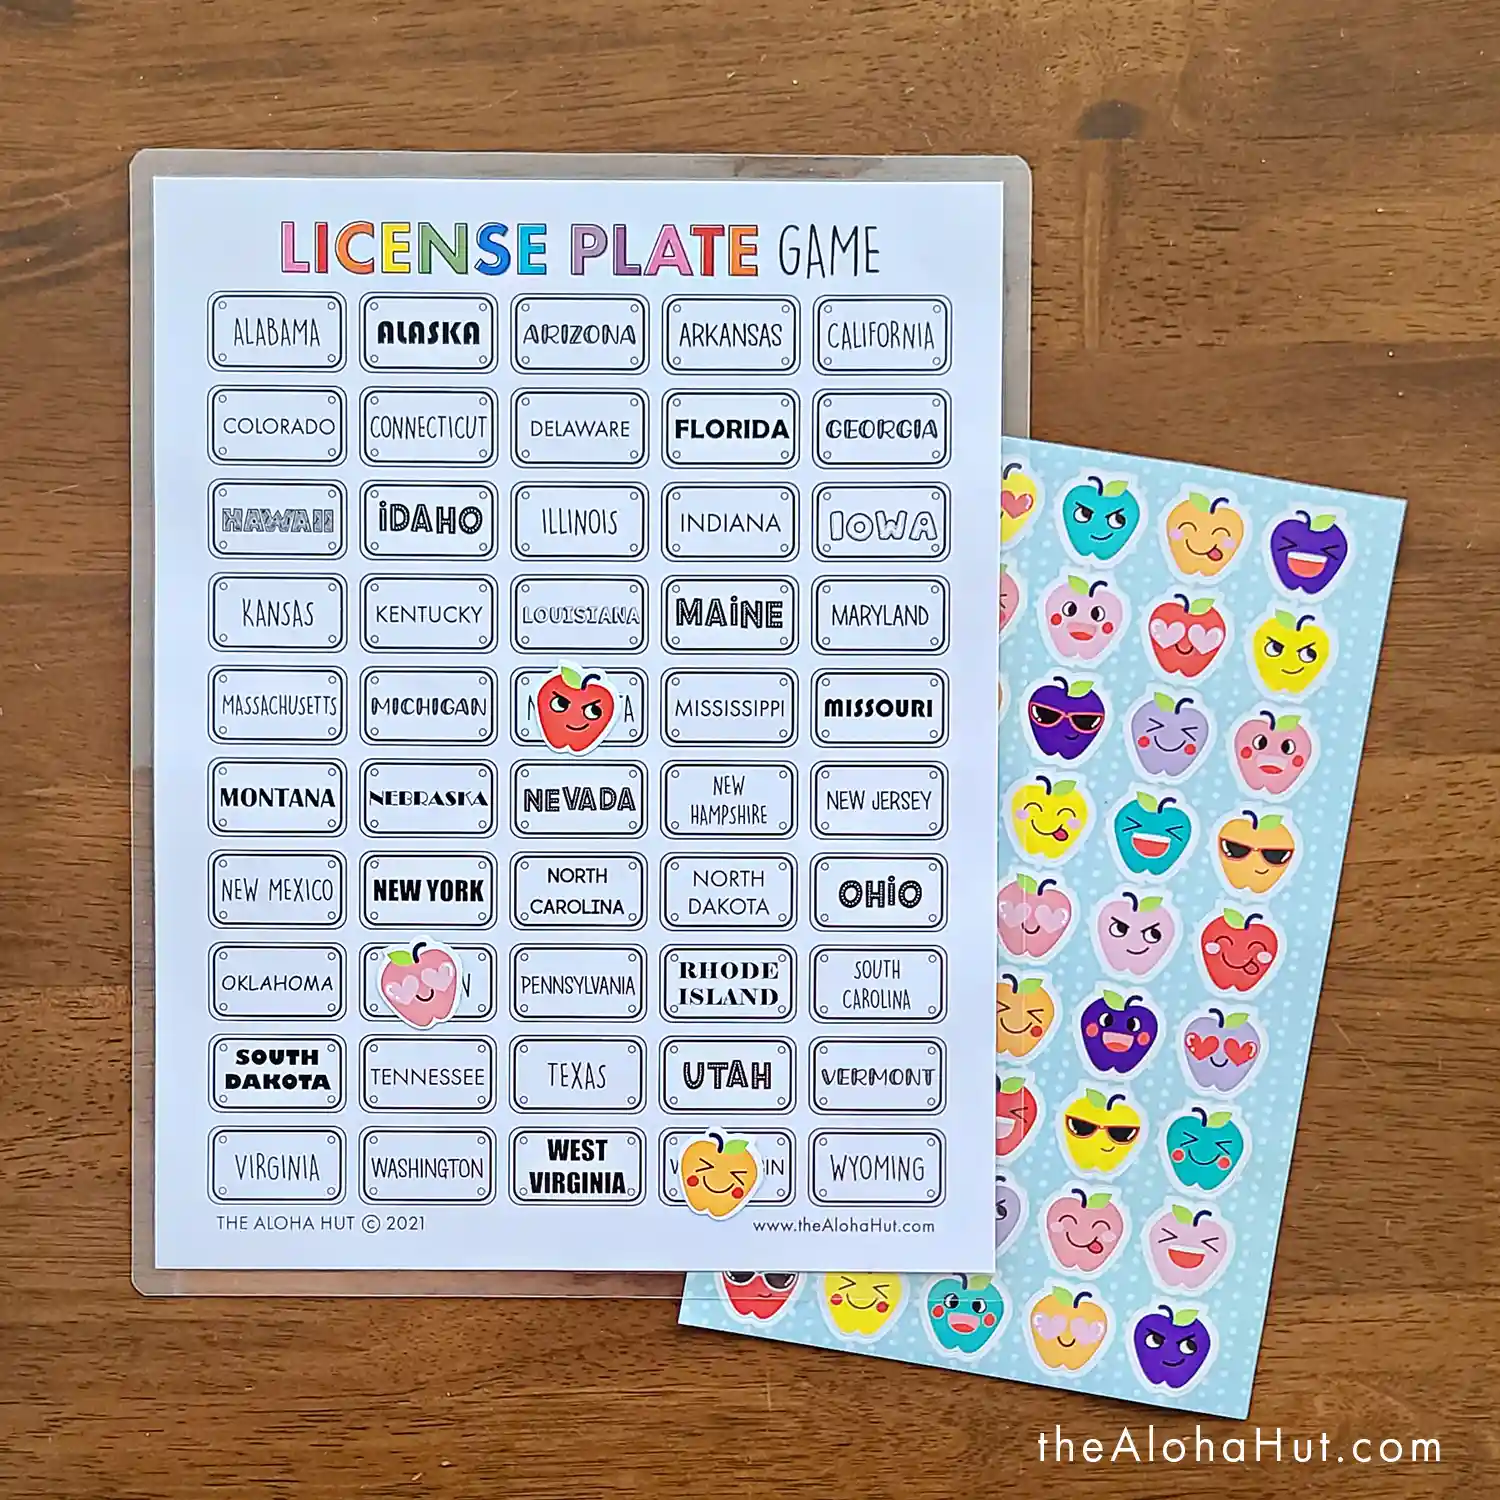 DIY Portable Road Trip Kits - 10 Free Printable Activity Pages - Travel Games - License Plate Game